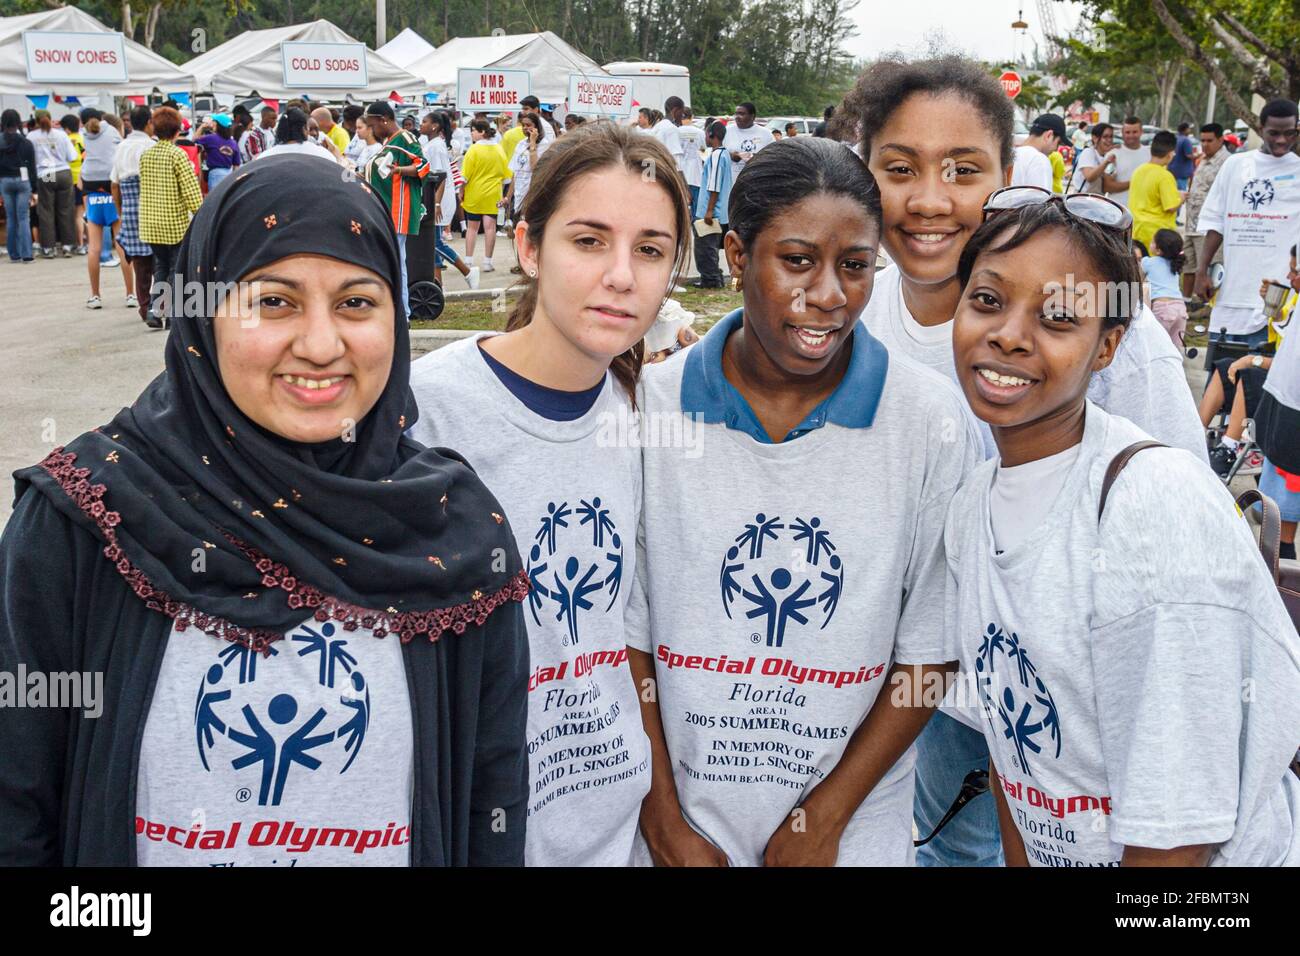 Florida North Miami FIU campus Special Olympics Summer Games,mentally disabled adult volunteer coach Muslim Black students,friends, Stock Photo